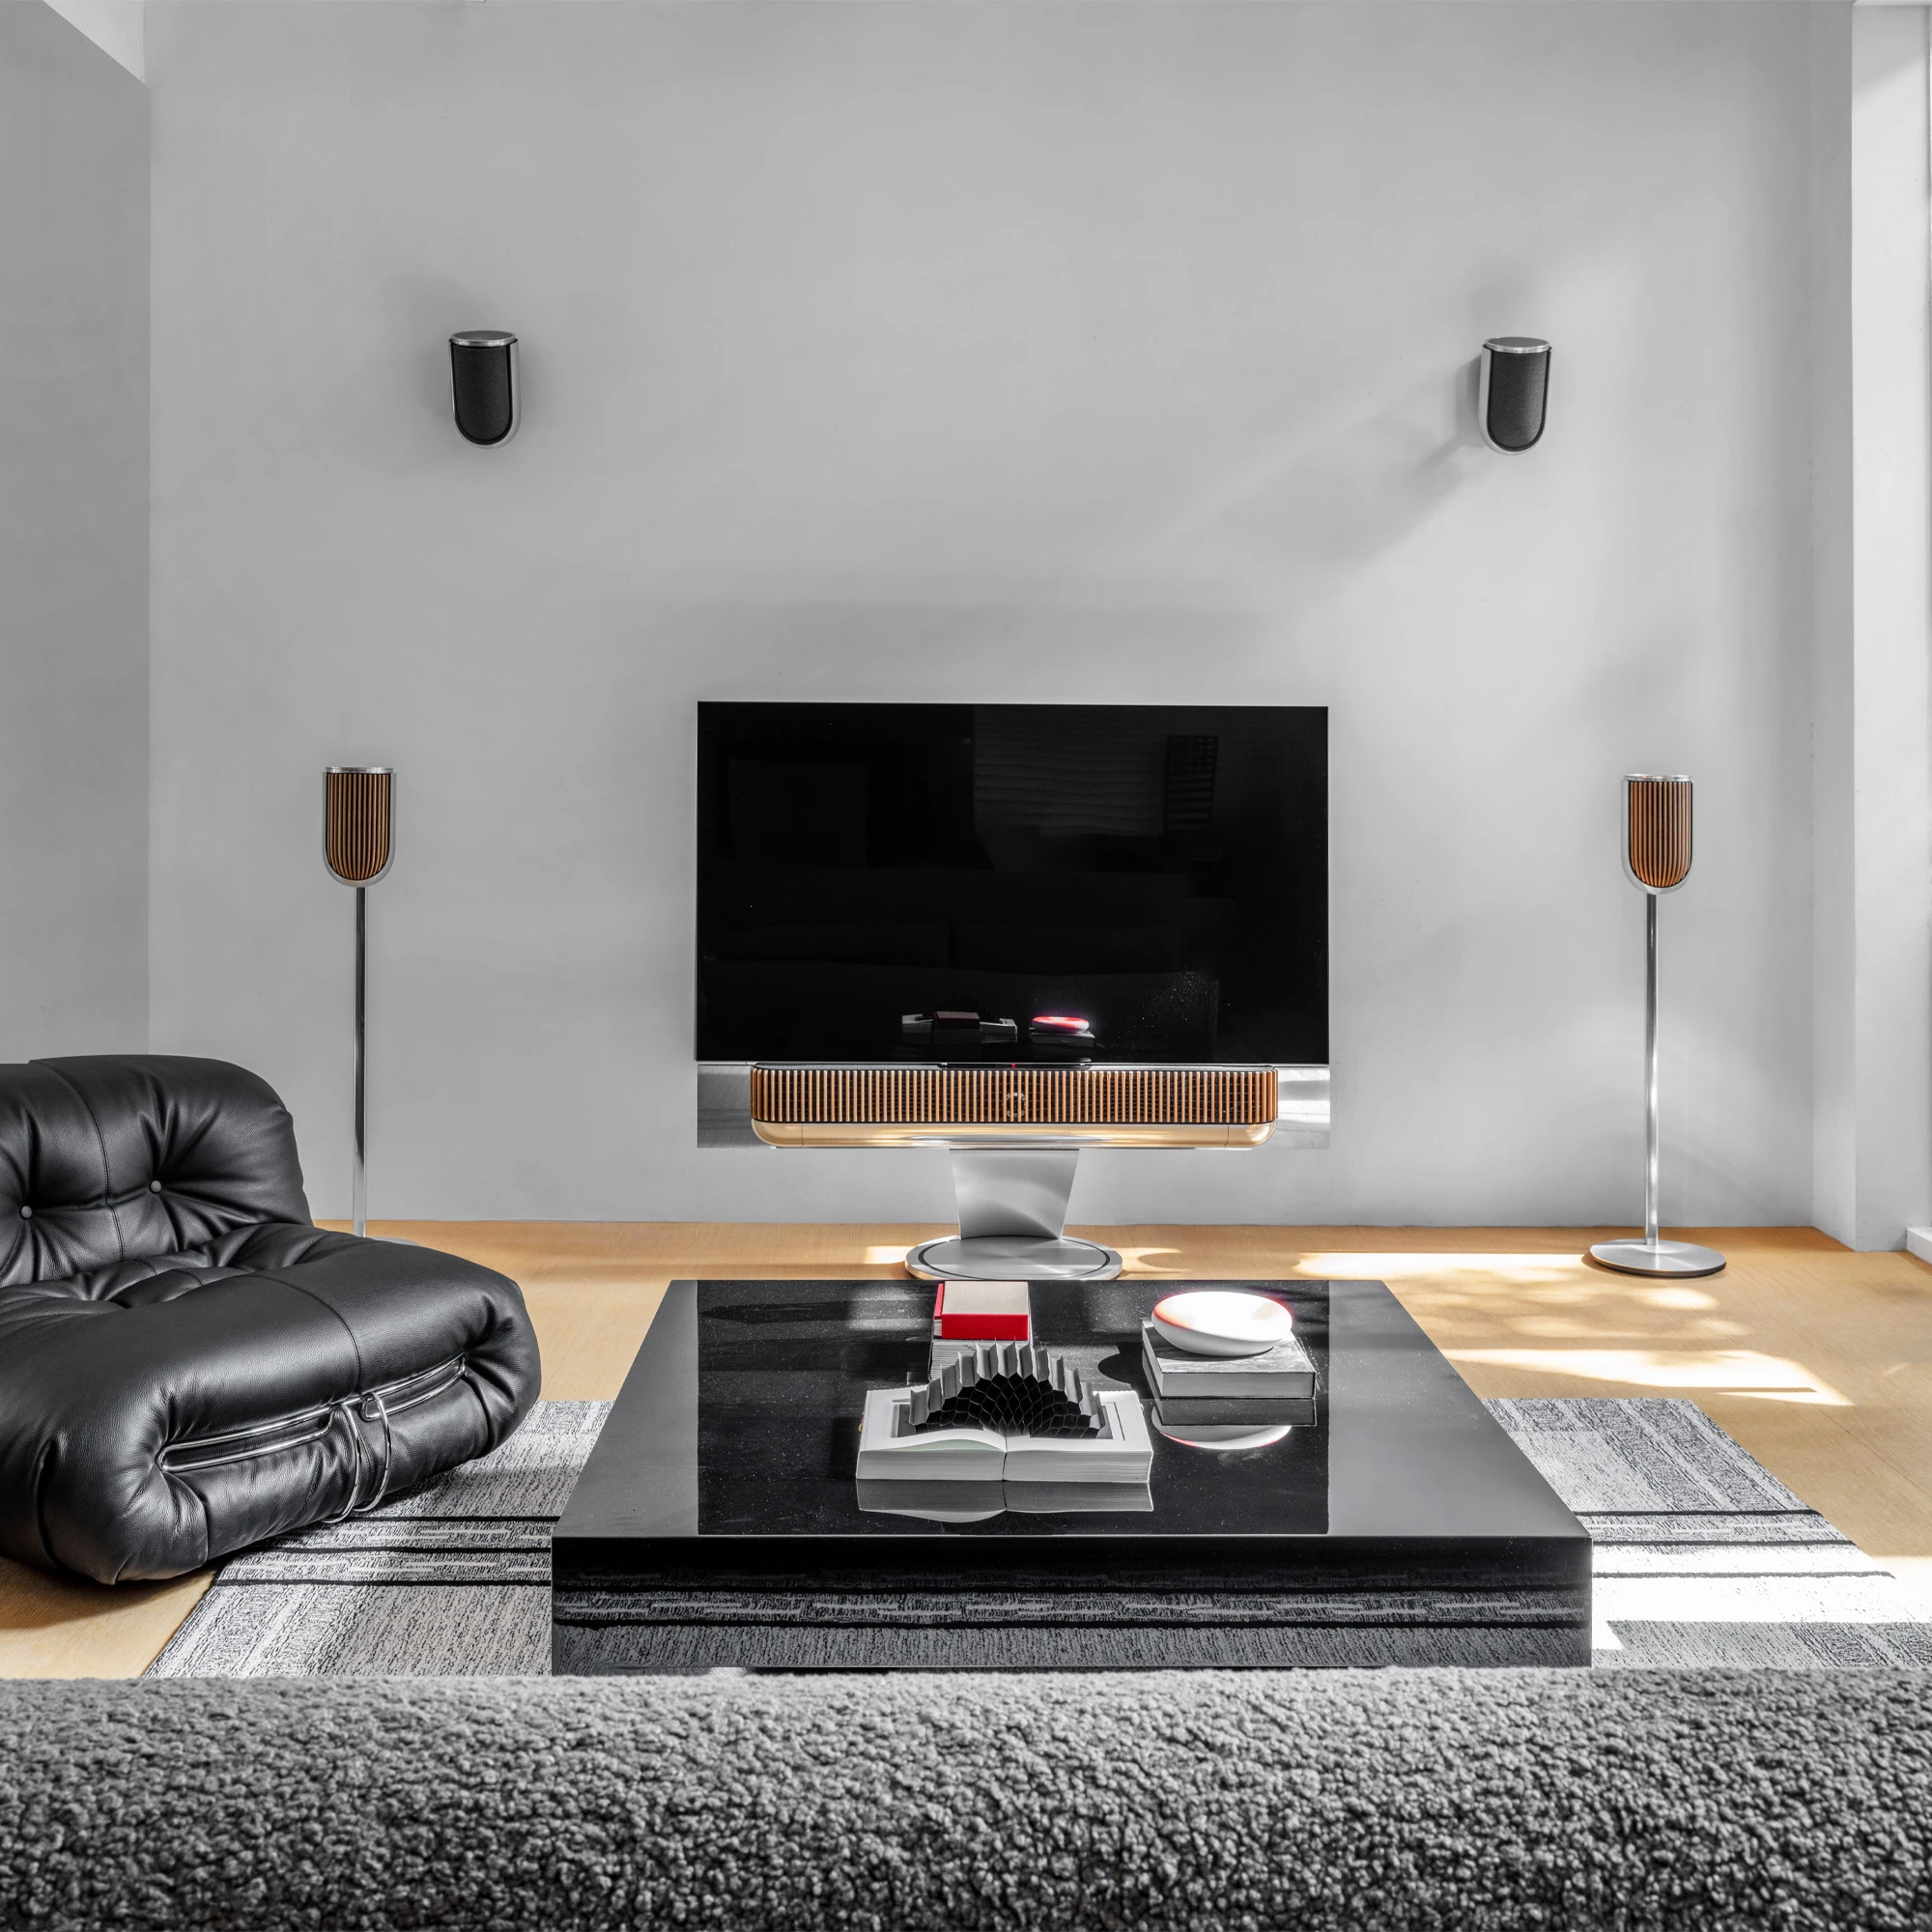 Image of Beolab 8 and Beosound Theatre in a living room